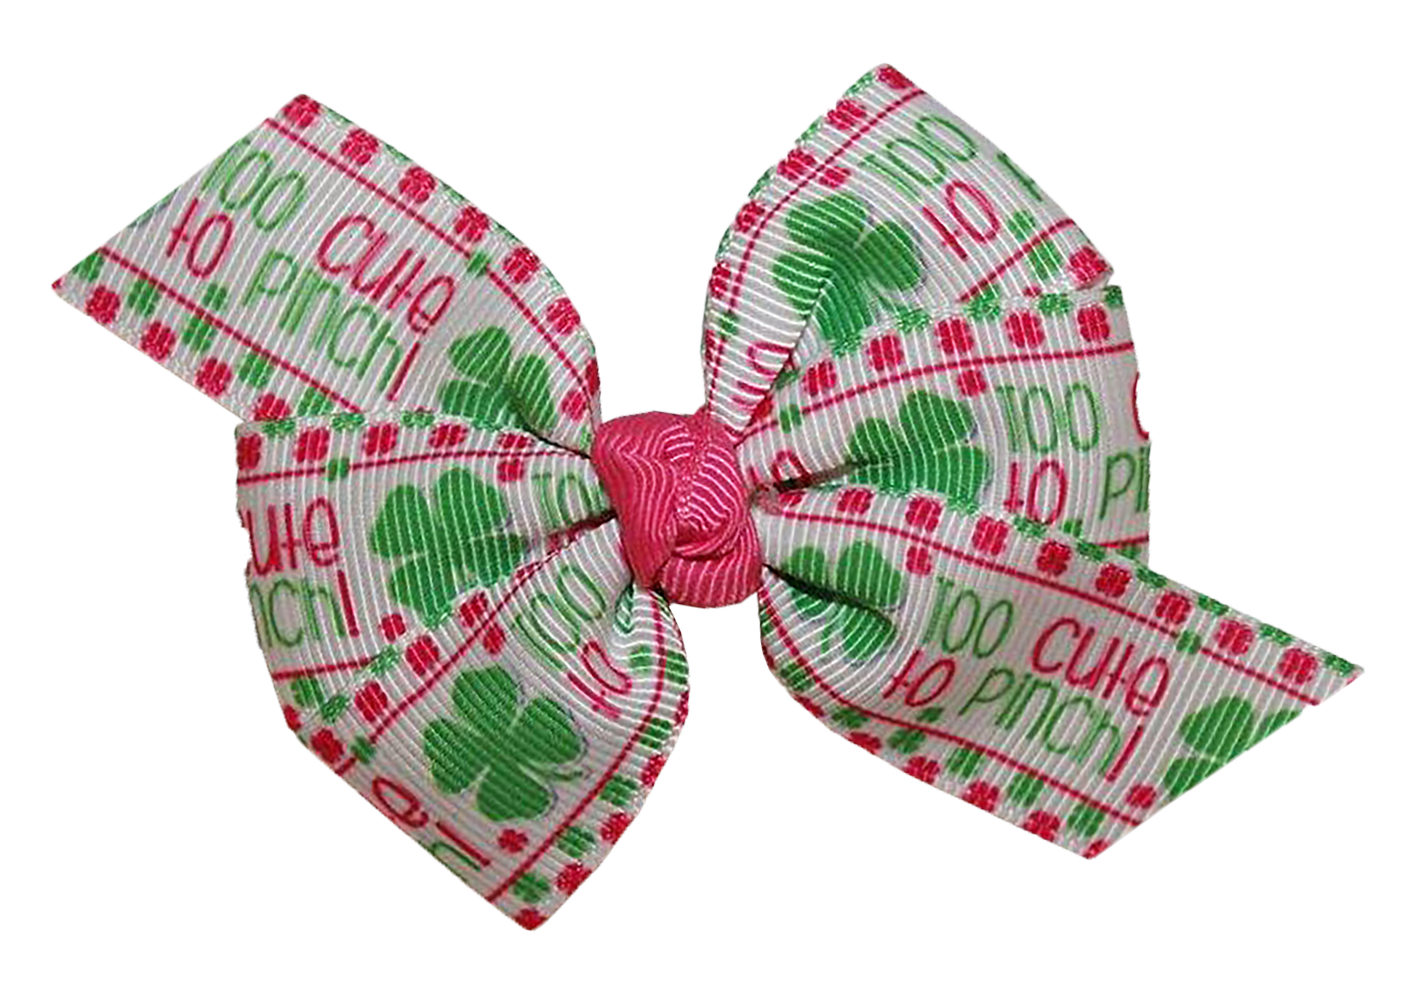 WD2U Baby Girl Set of 2 Too Cute to Pinch St Patricks Hair Bows Alligator Clips